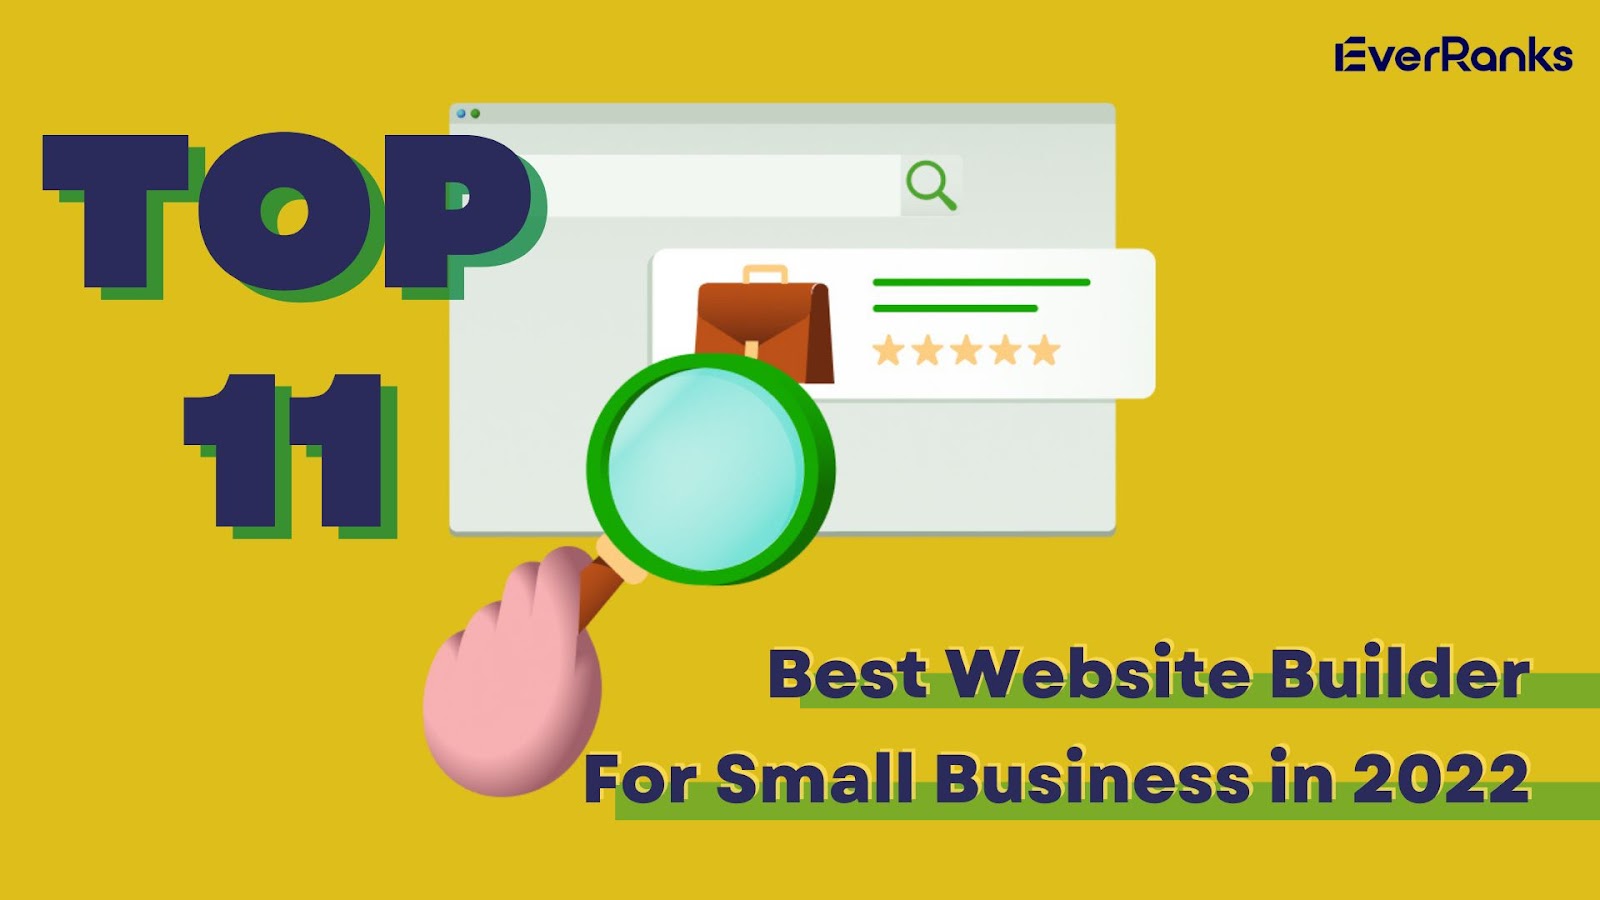 Top 12 Best Website Builder For Small Businesses in 2022